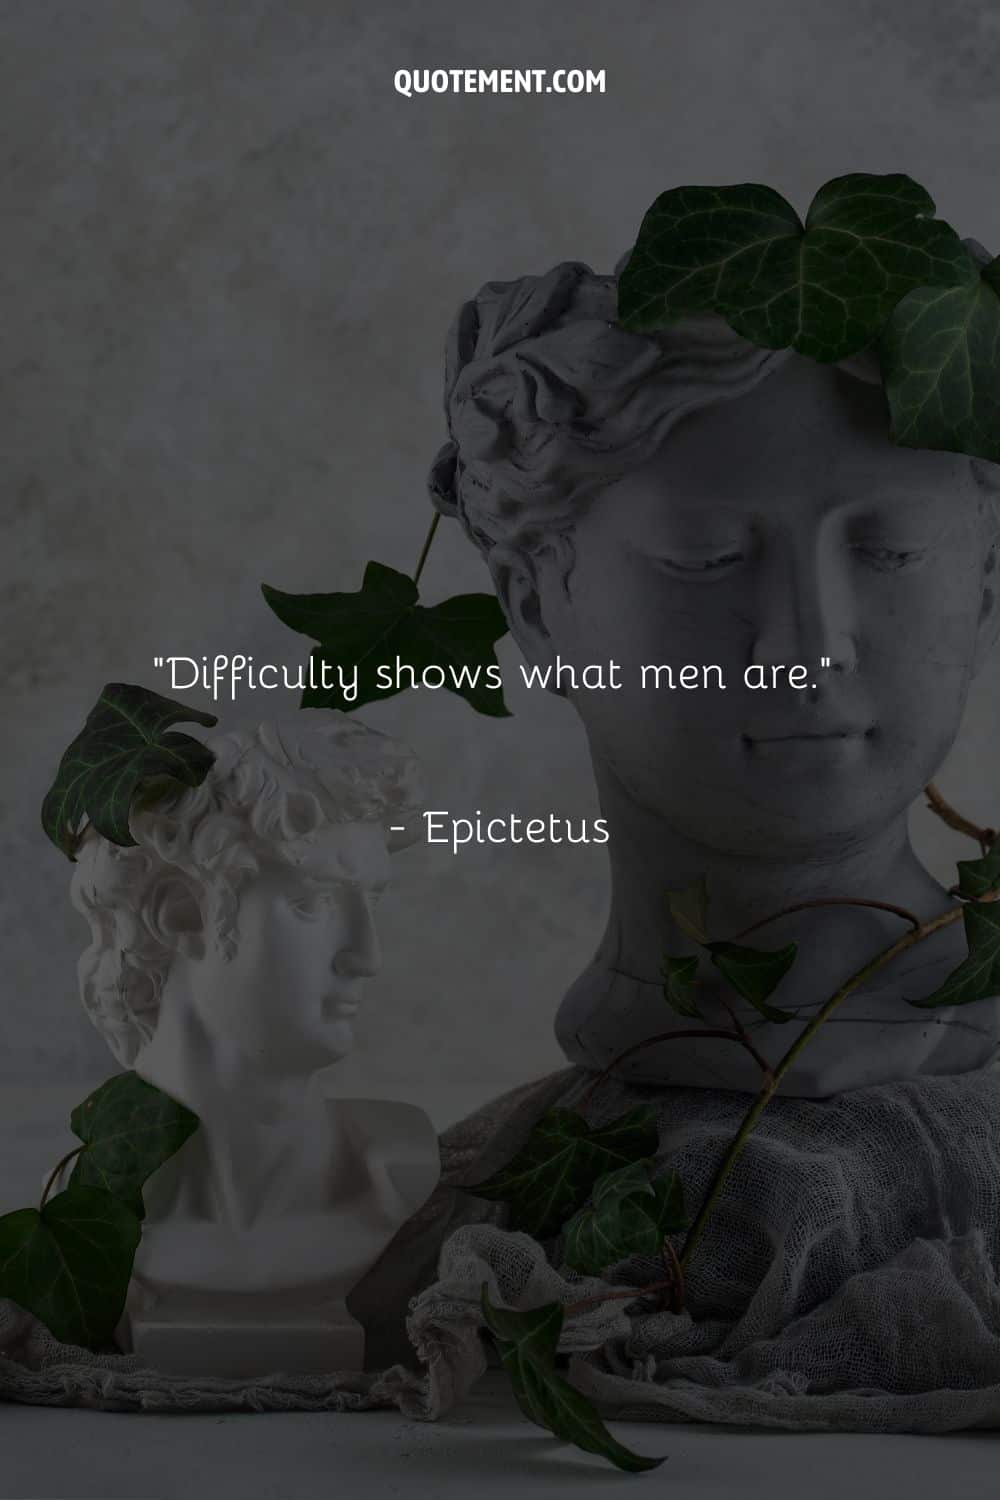 Difficulty shows what men are.